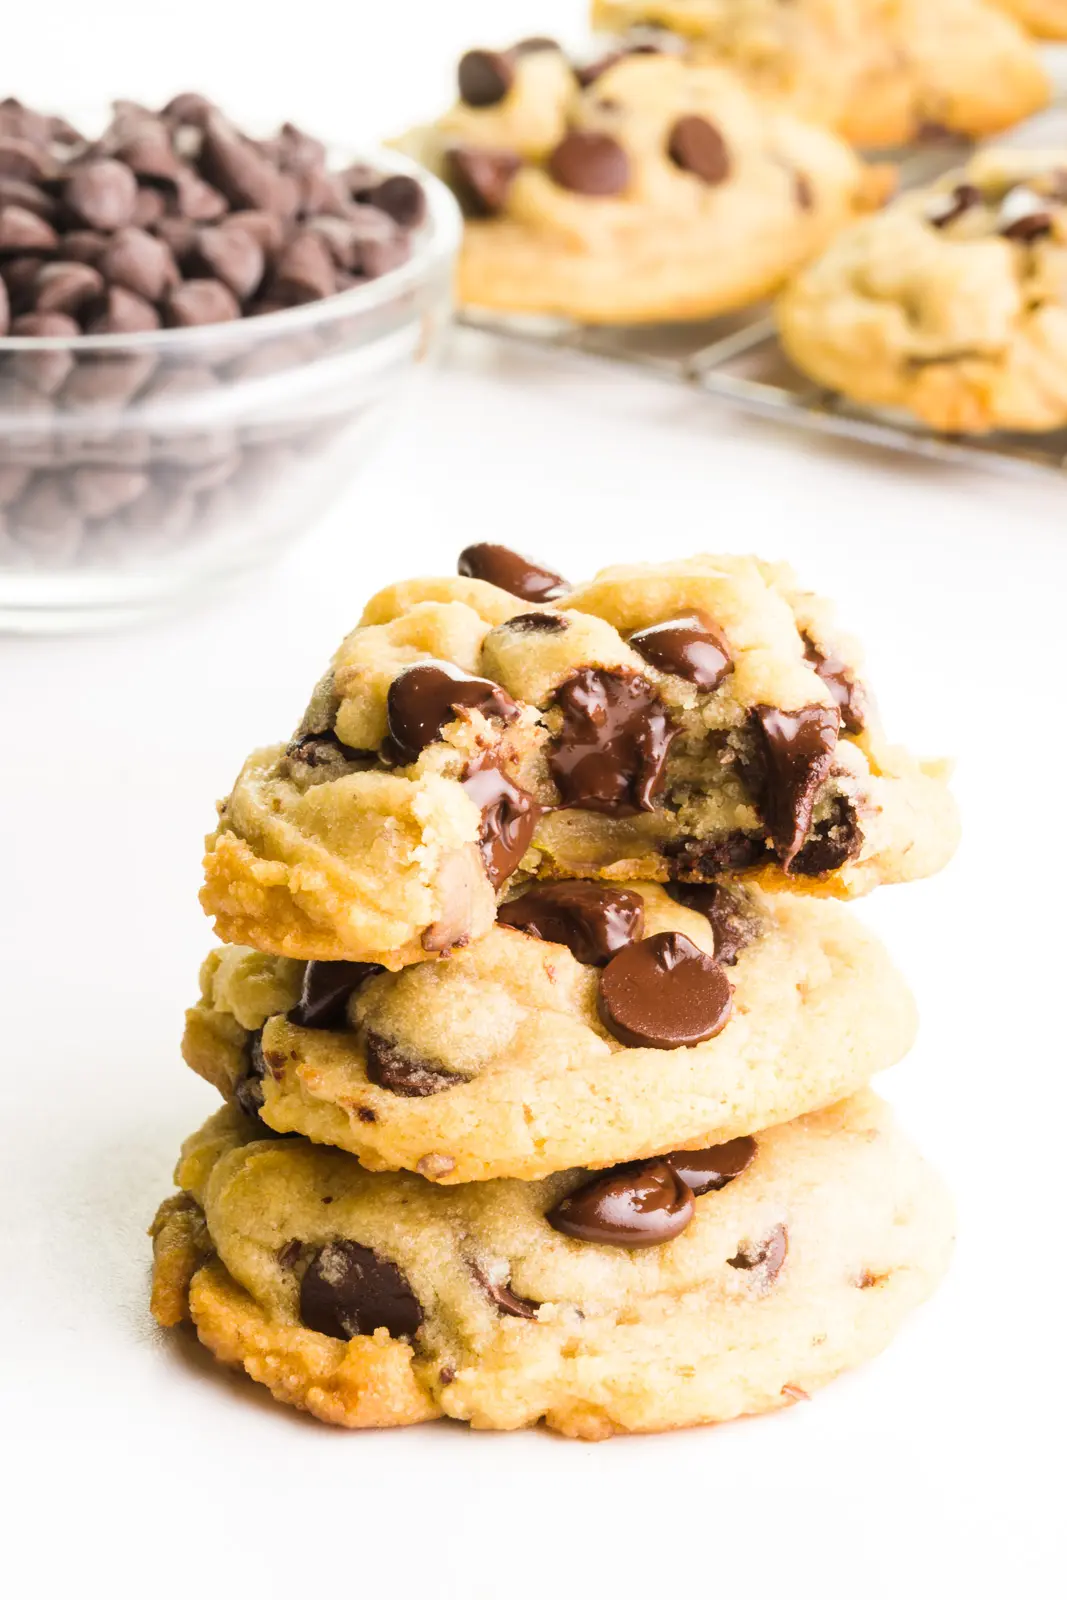 A stack of vegan chocolate chip cookies, shows the top one with a bite taken out. There's a bowl of chocolate chips and more cookies cooling on a wire rack behind it.